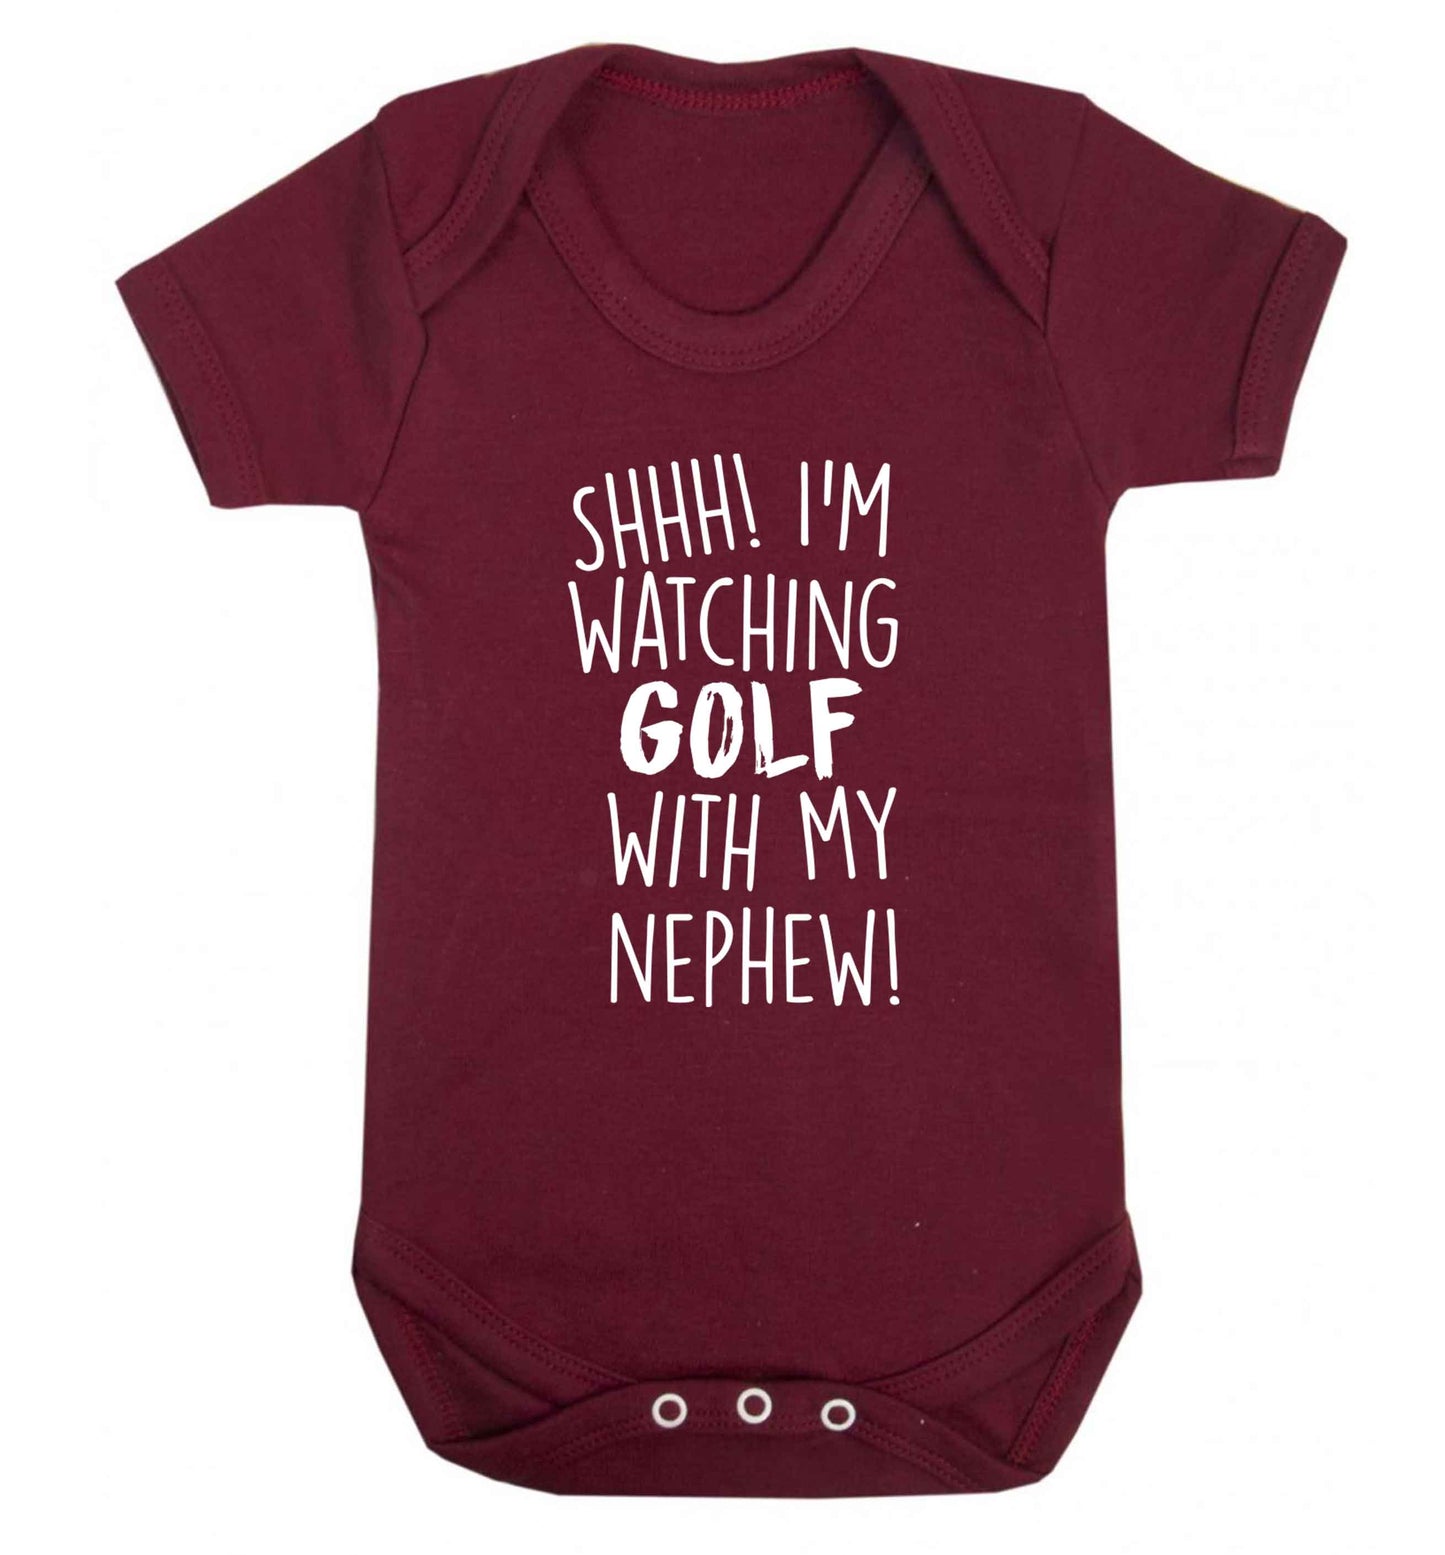 Shh I'm watching golf with my nephew Baby Vest maroon 18-24 months